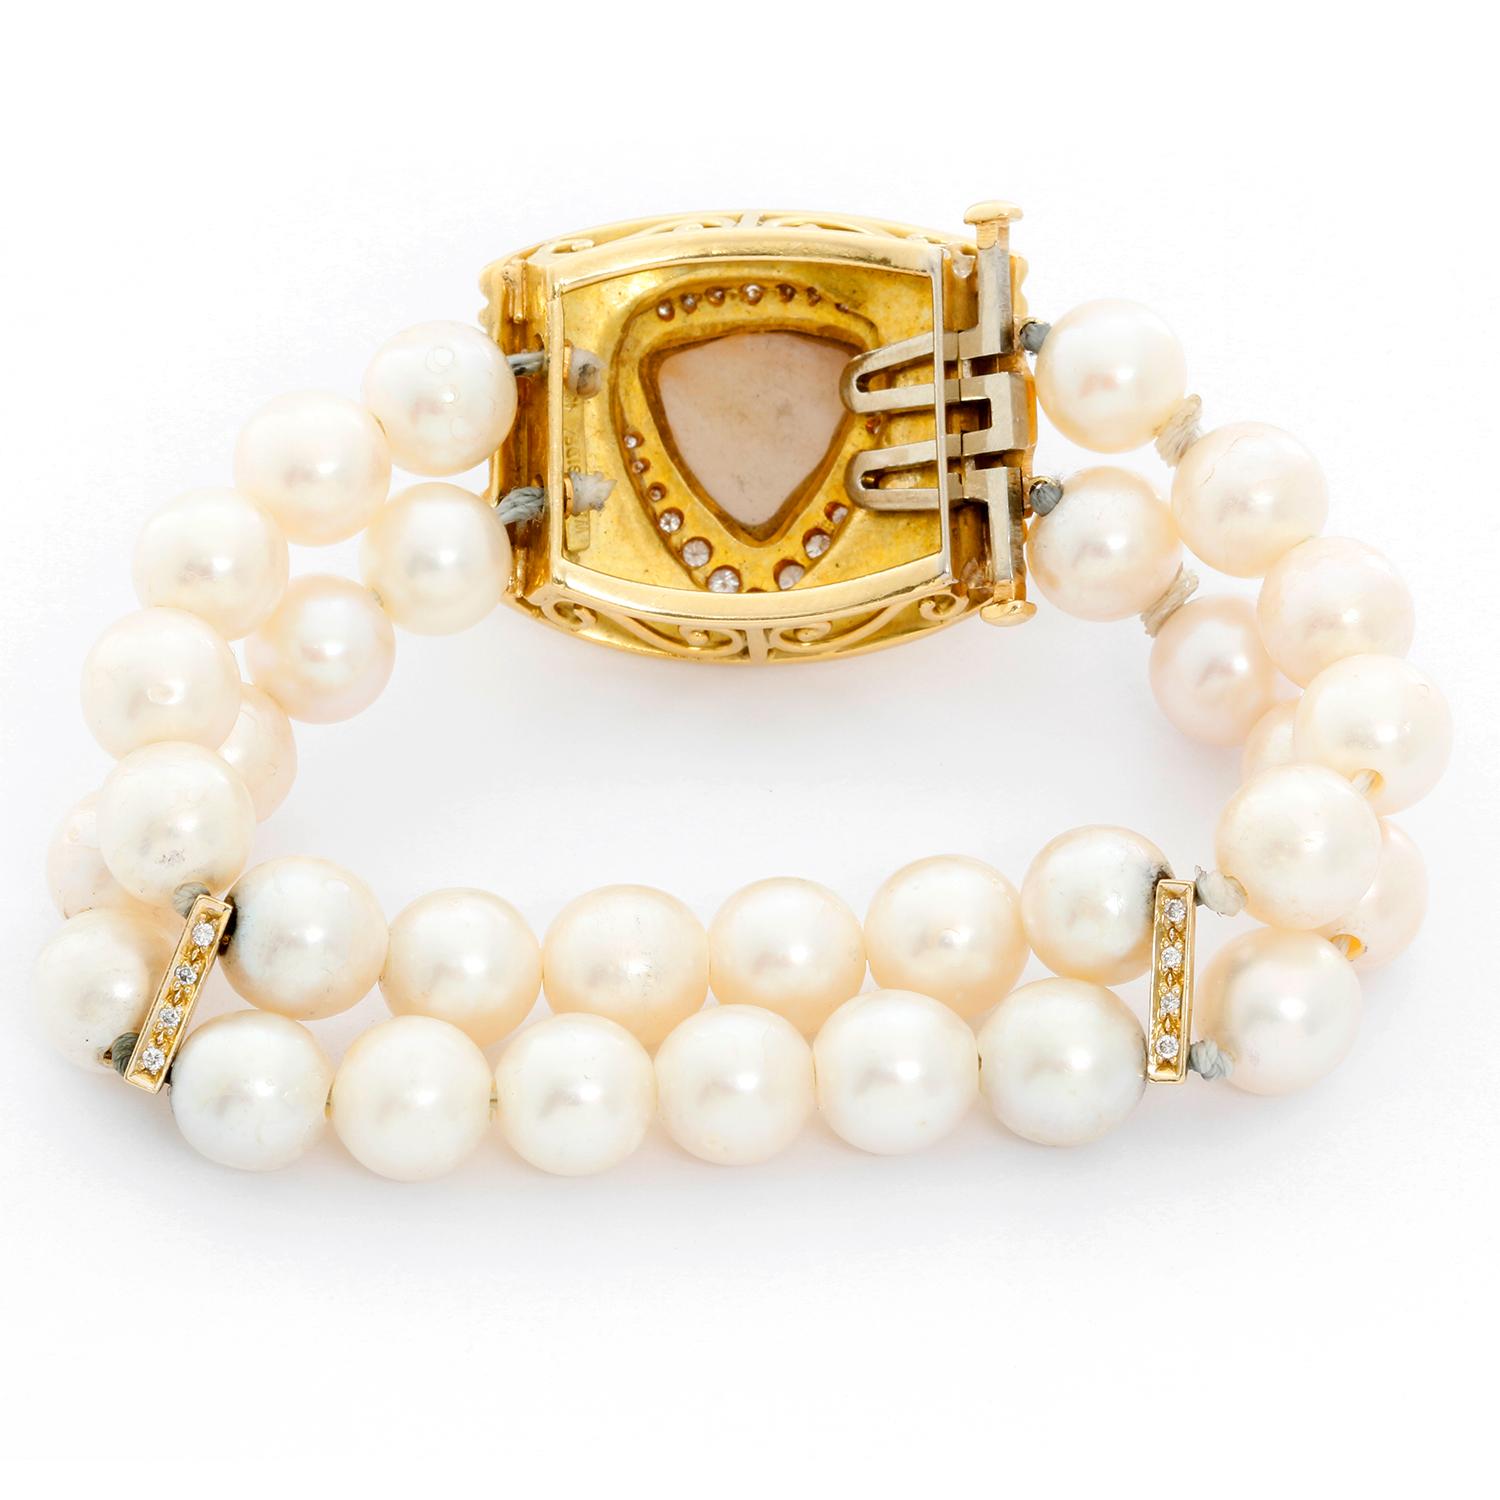 Robert Whiteside Diamond and Cultured Pearl Gold Bracelet - Robert Whiteside Diamond and Cultured Pearl Gold Bracelet  - a double row of 32 pearls on the bracelet measure 8.55mm - 9.20mm.  The braceletis accented with a Mabe pearl in the center